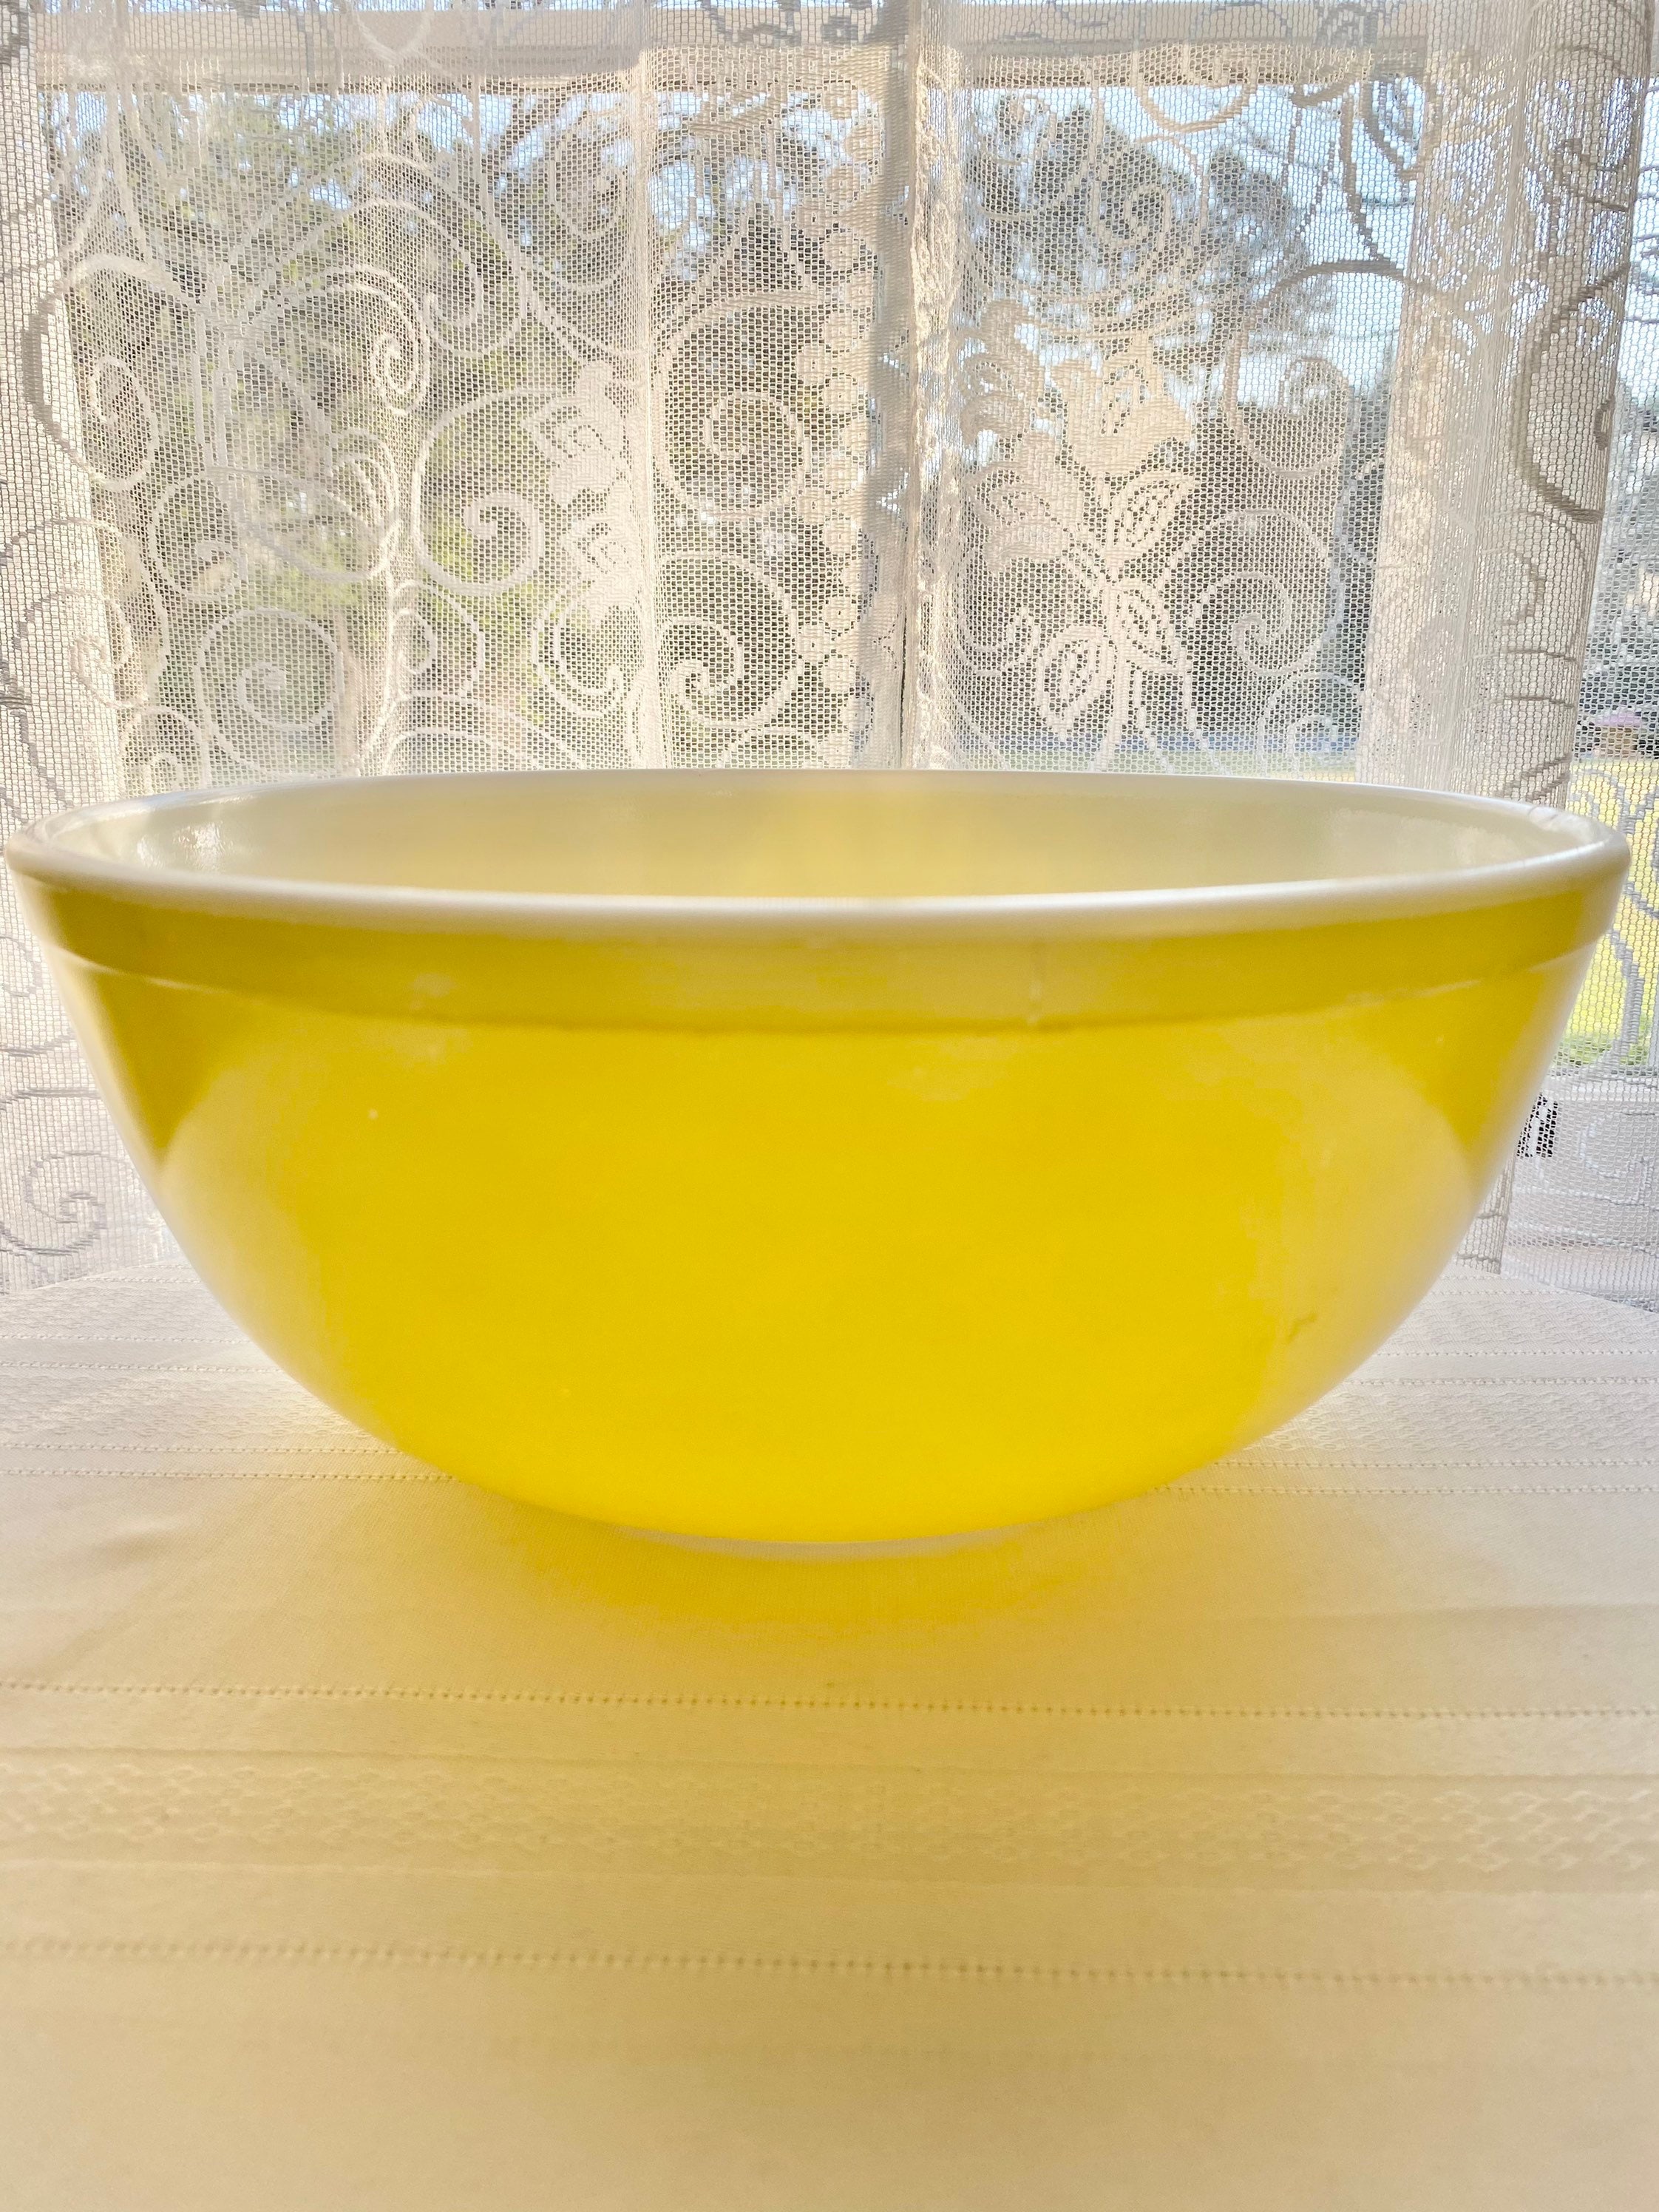 Vintage Pyrex Small Yellow Mixing Bowl, Vintage Pyrex Primary Color Mixing  Bowl, Pyrex 401 1 1/2 QT, Creamy Yellow Pyrex Oven Ware Baking 